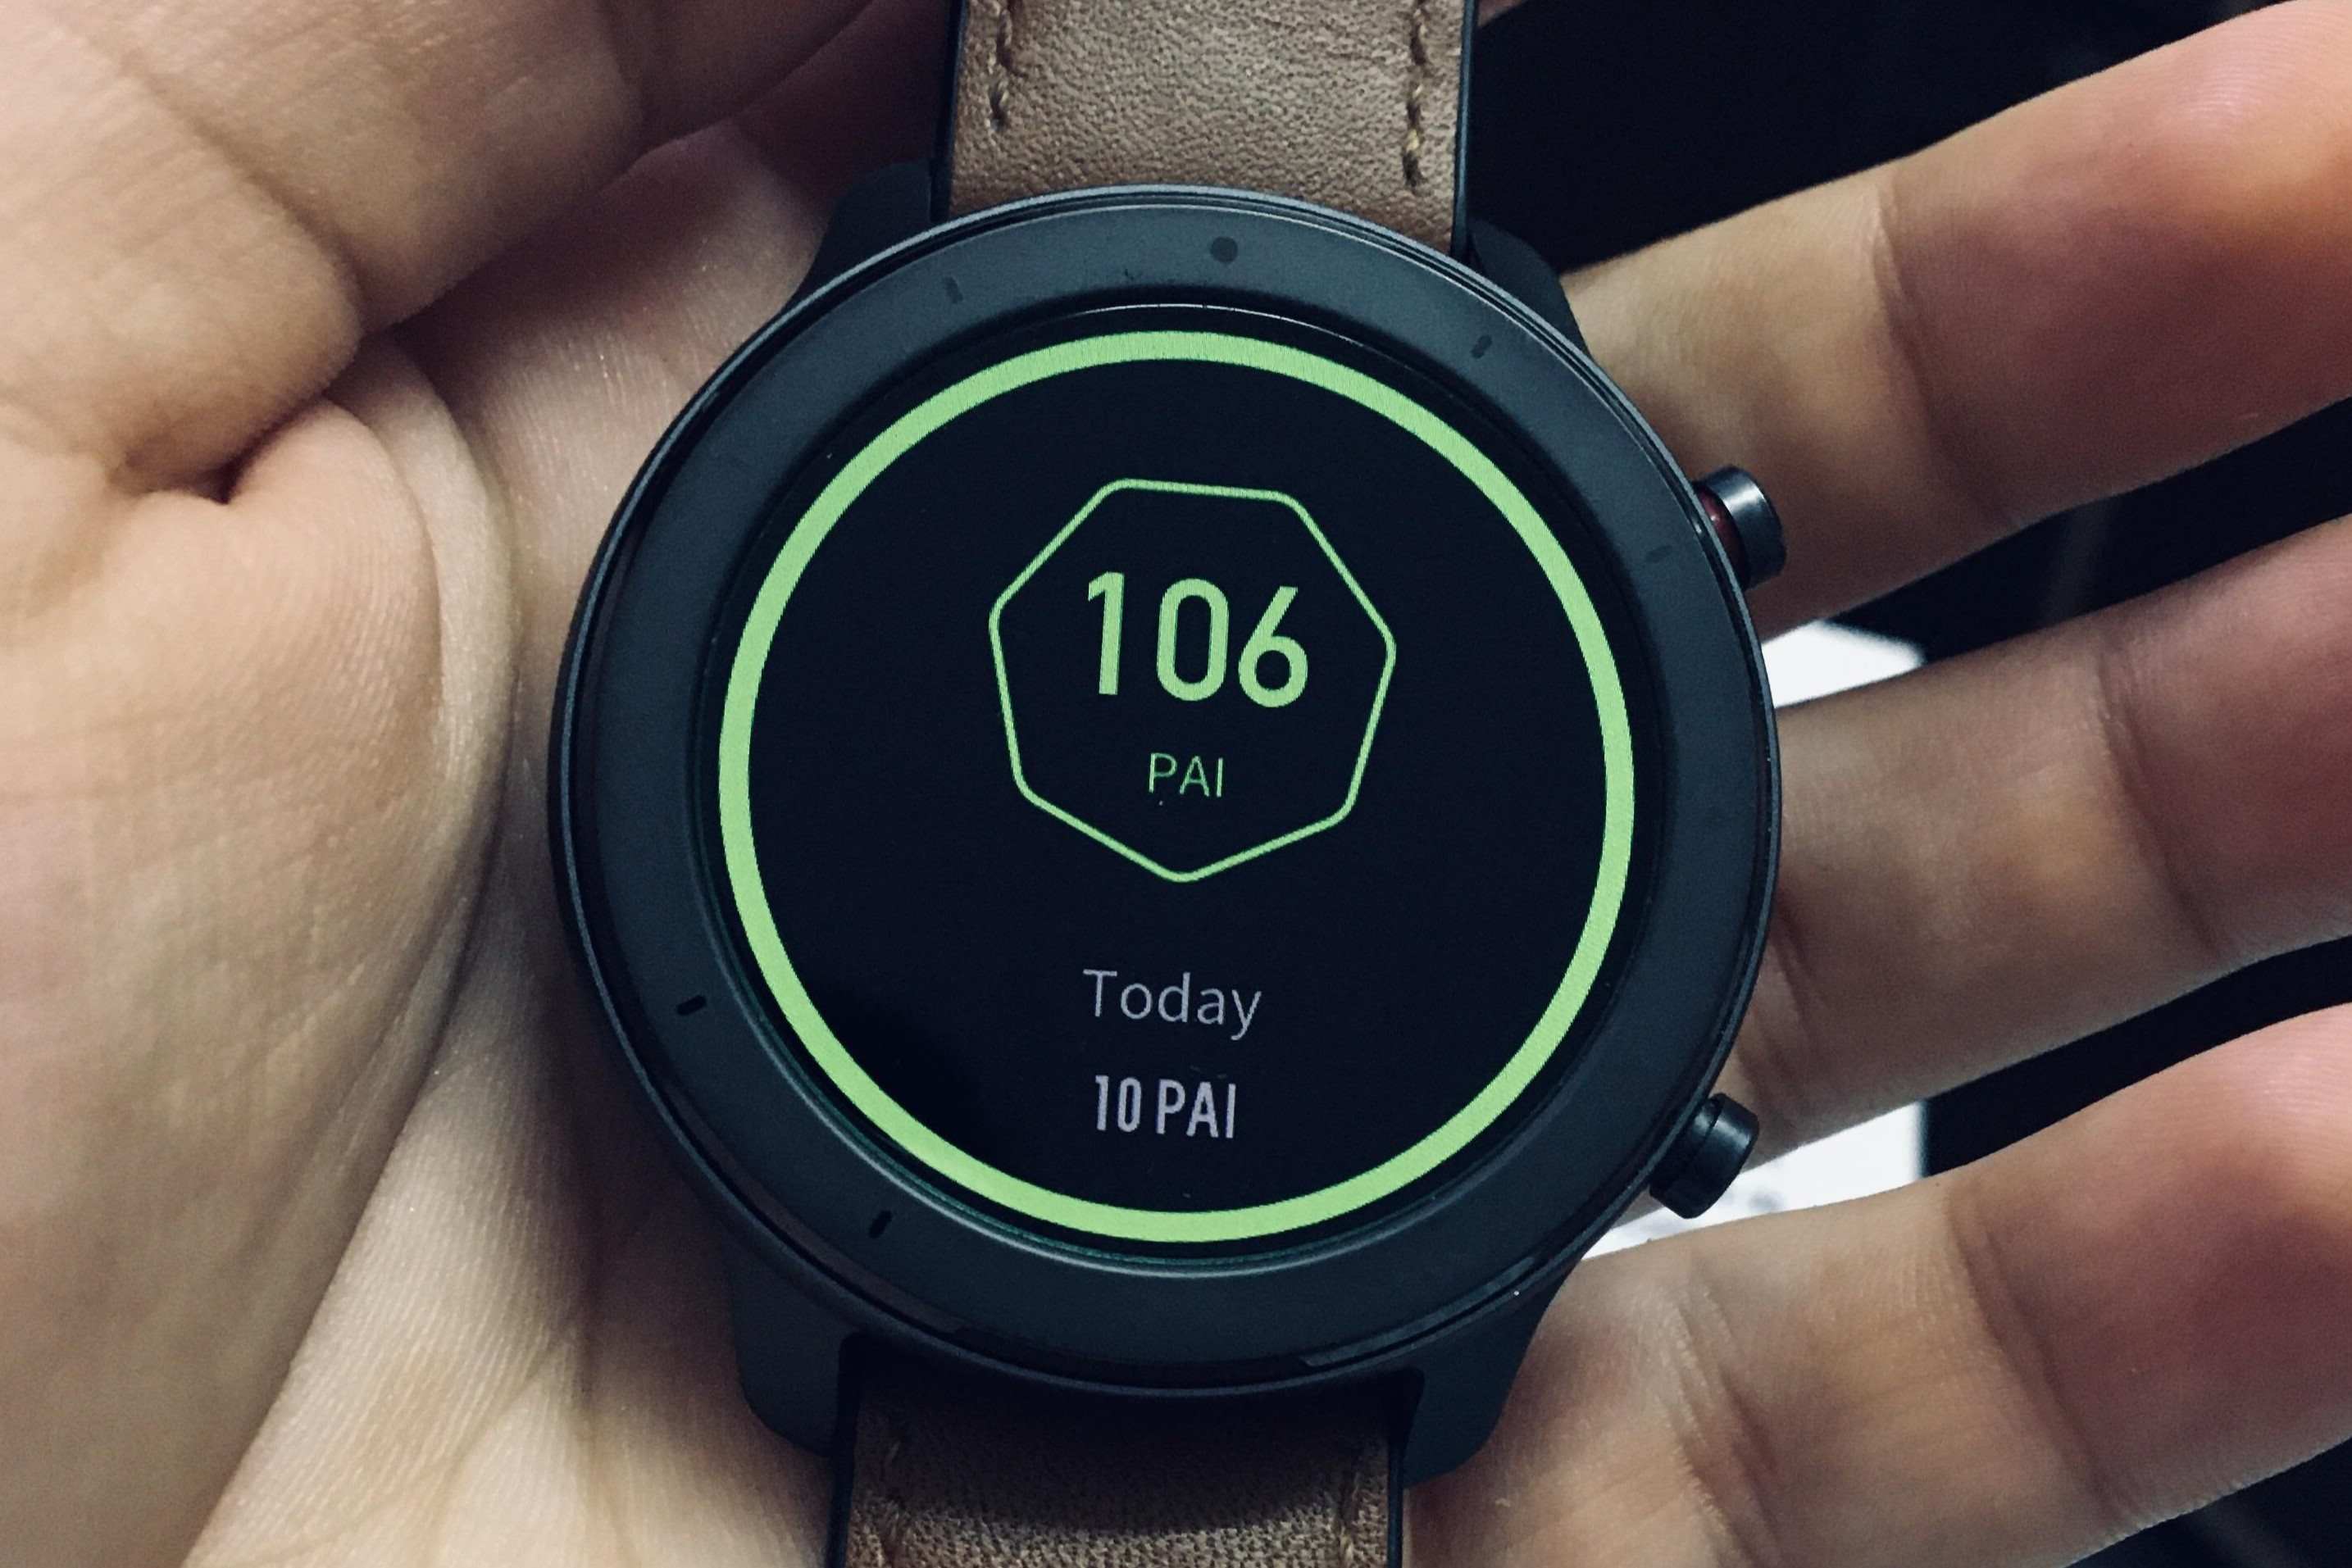 Health Metric Explained: Unraveling The Meaning Of Pai On Smartwatches